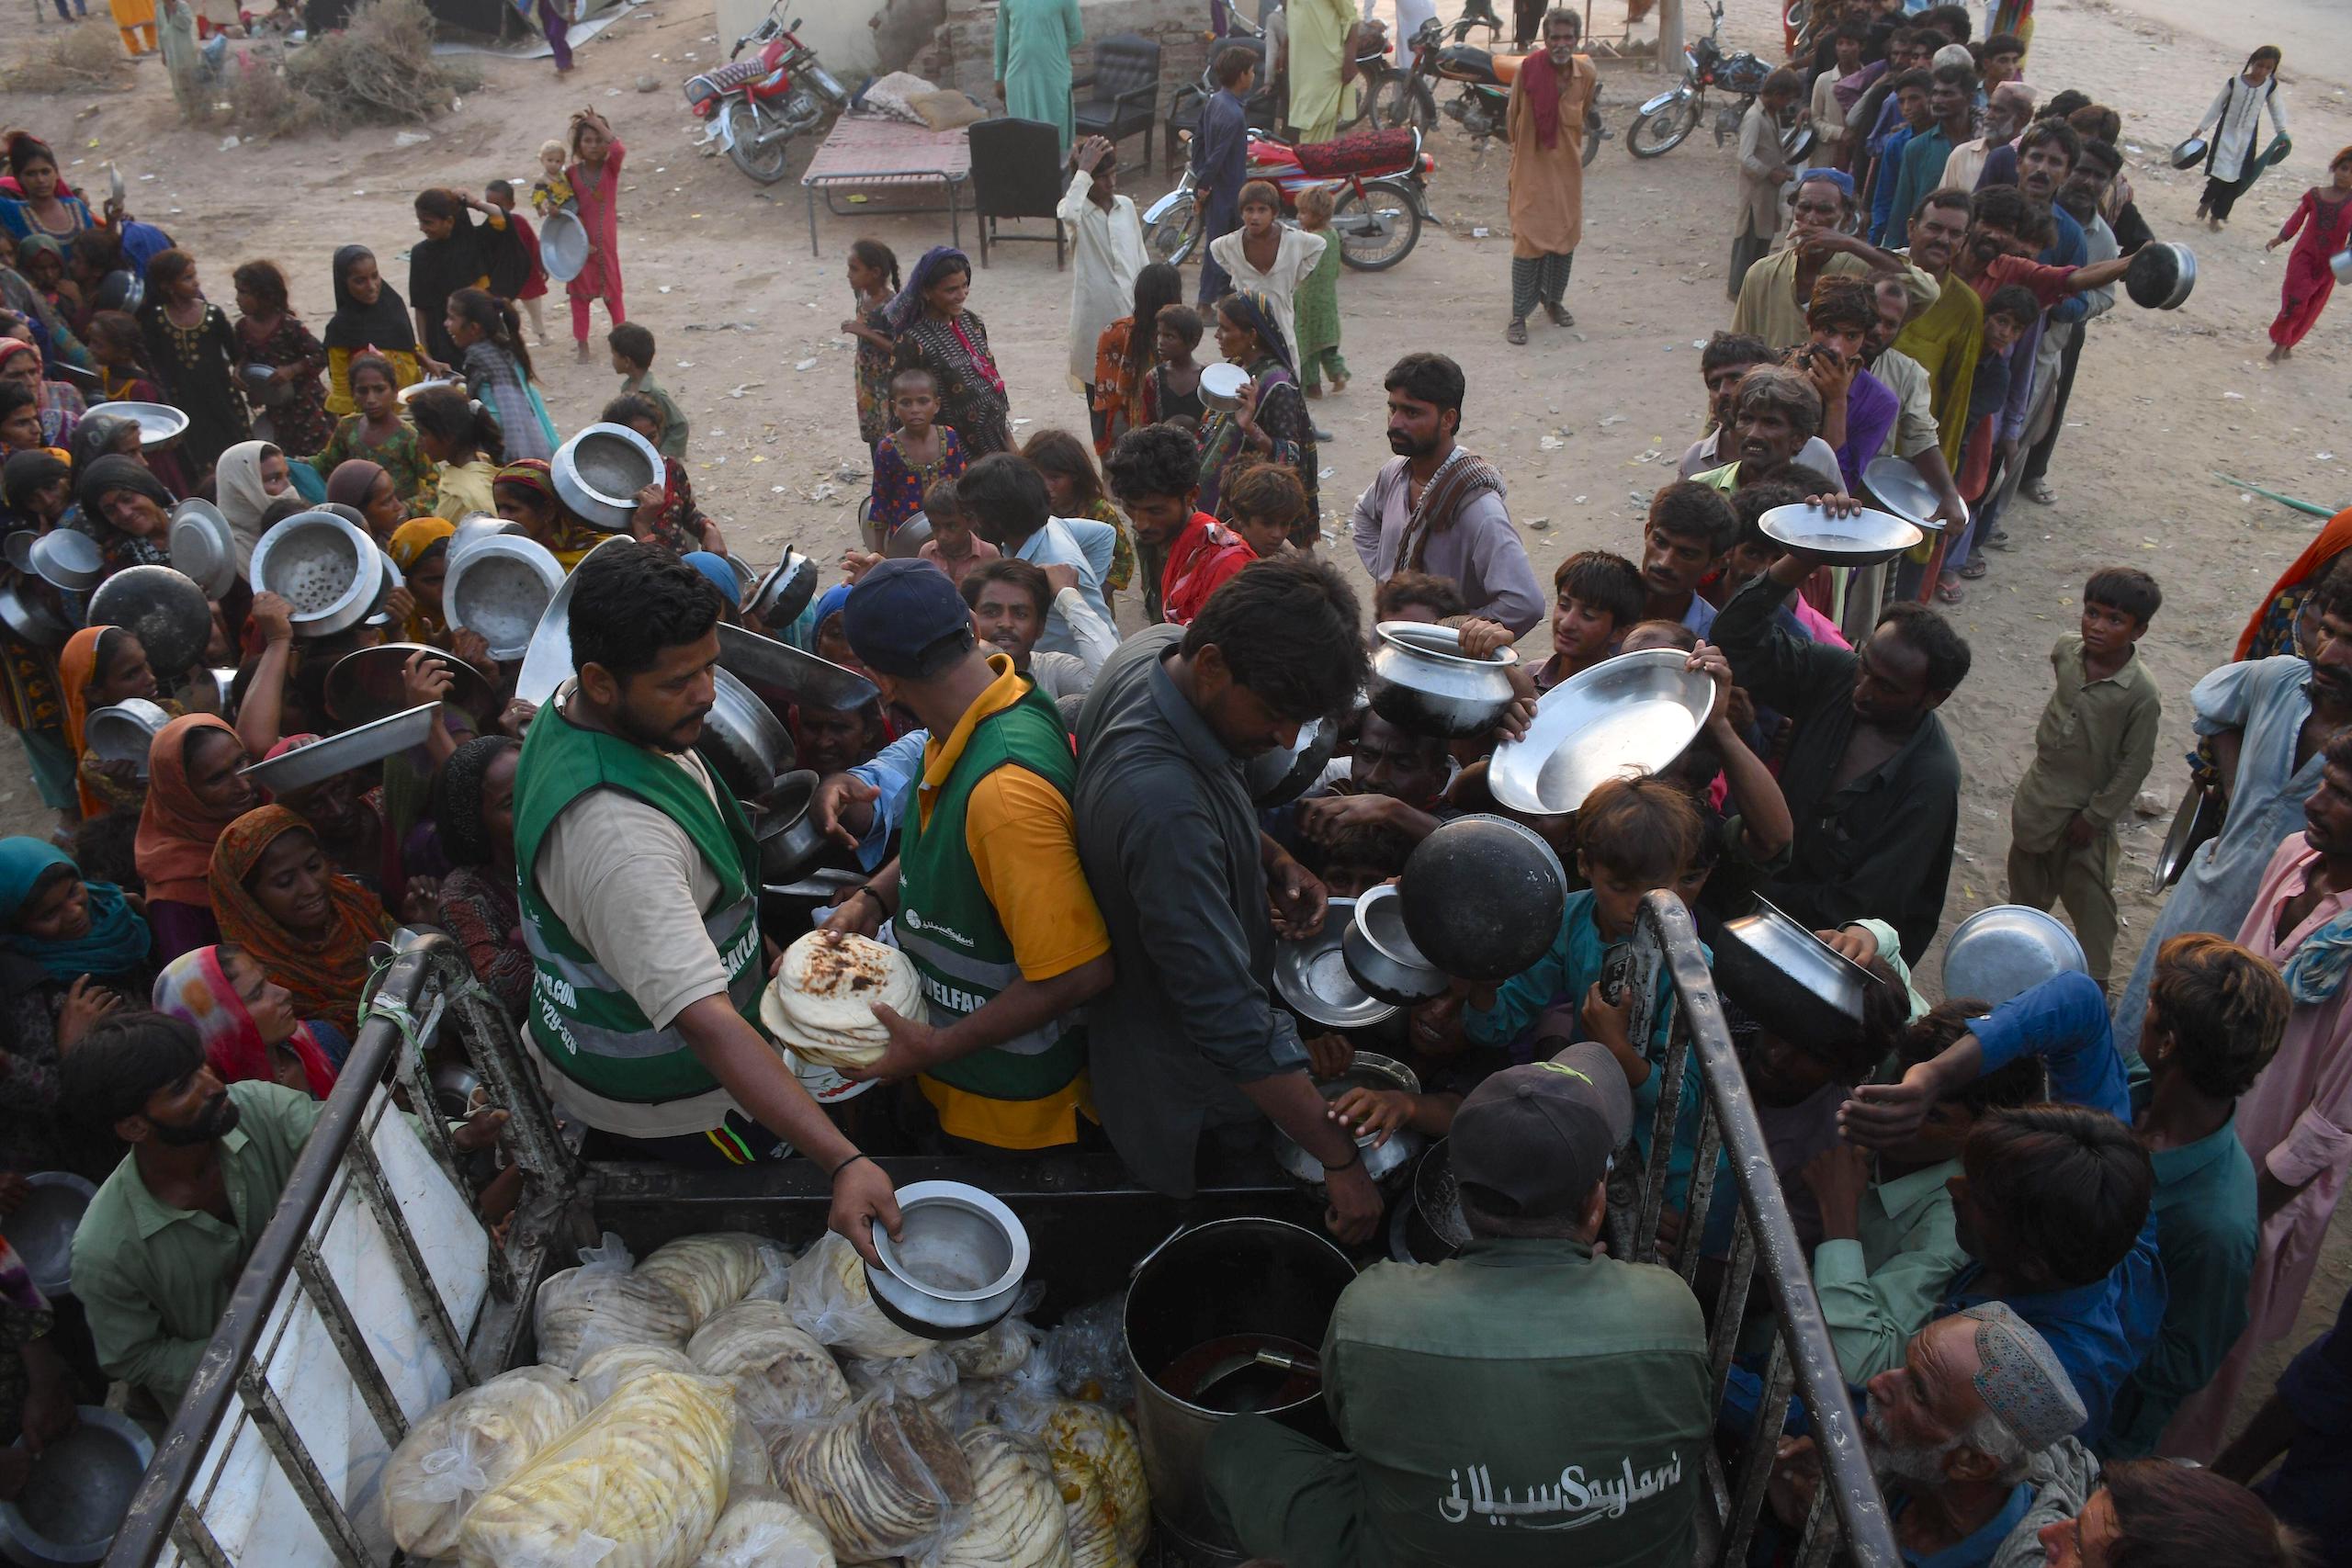 Free food distributed to people affected by floods in Pakistan, in September 2022. Pakistan suffered billions of dollars of crop losses in the floods. (Image: Yasir Ali Rao / Alamy)